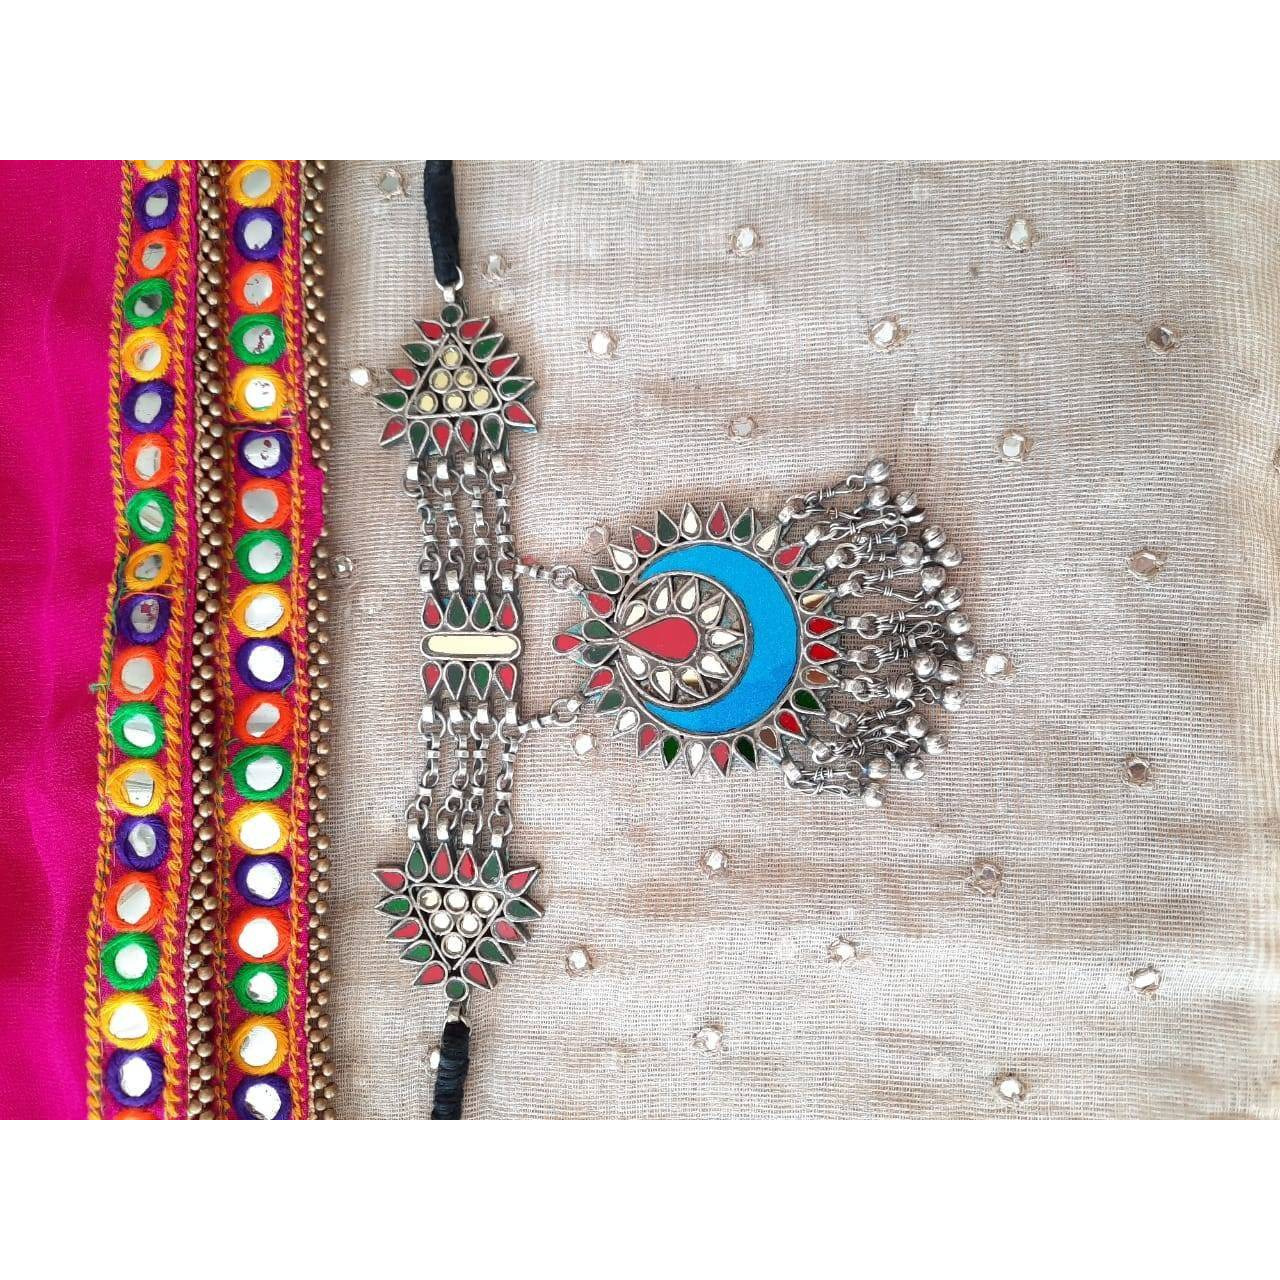 This Afghani Choker Necklace is crafted in oxidized silver that is a perfect amalgamation of beautiful multi-color enamel work and perky ghungroos that will lace your collar to give you a rich and vibrant look. Style this up for a high-statement boho look.